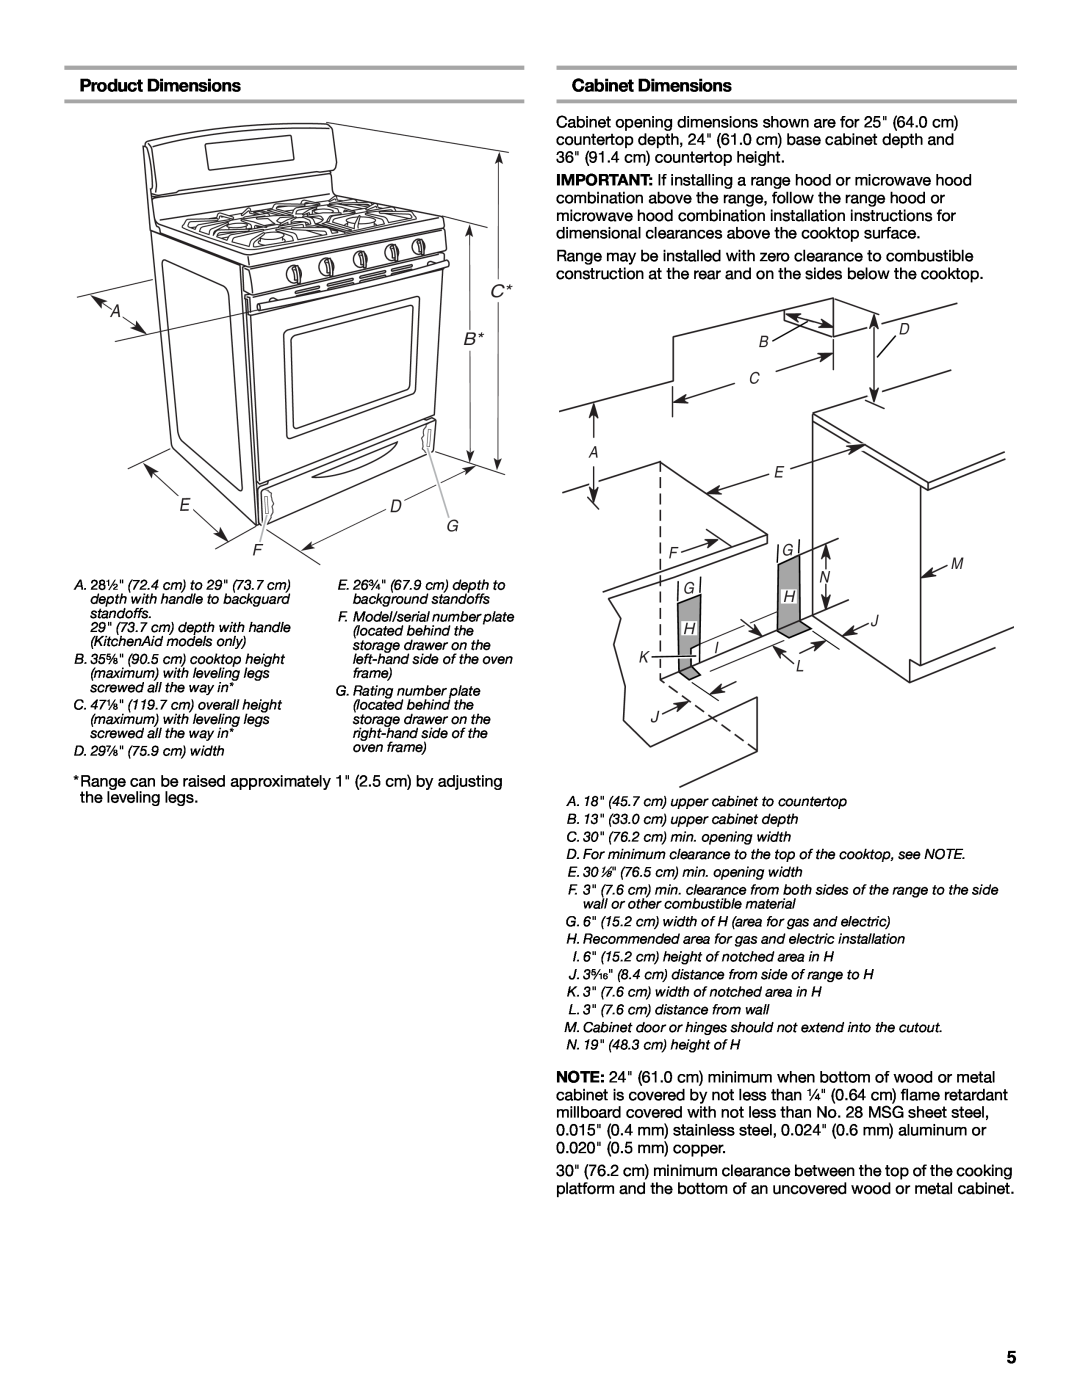 Maytag W10258096A installation instructions Product Dimensions, Cabinet Dimensions, C B D, D B C A 